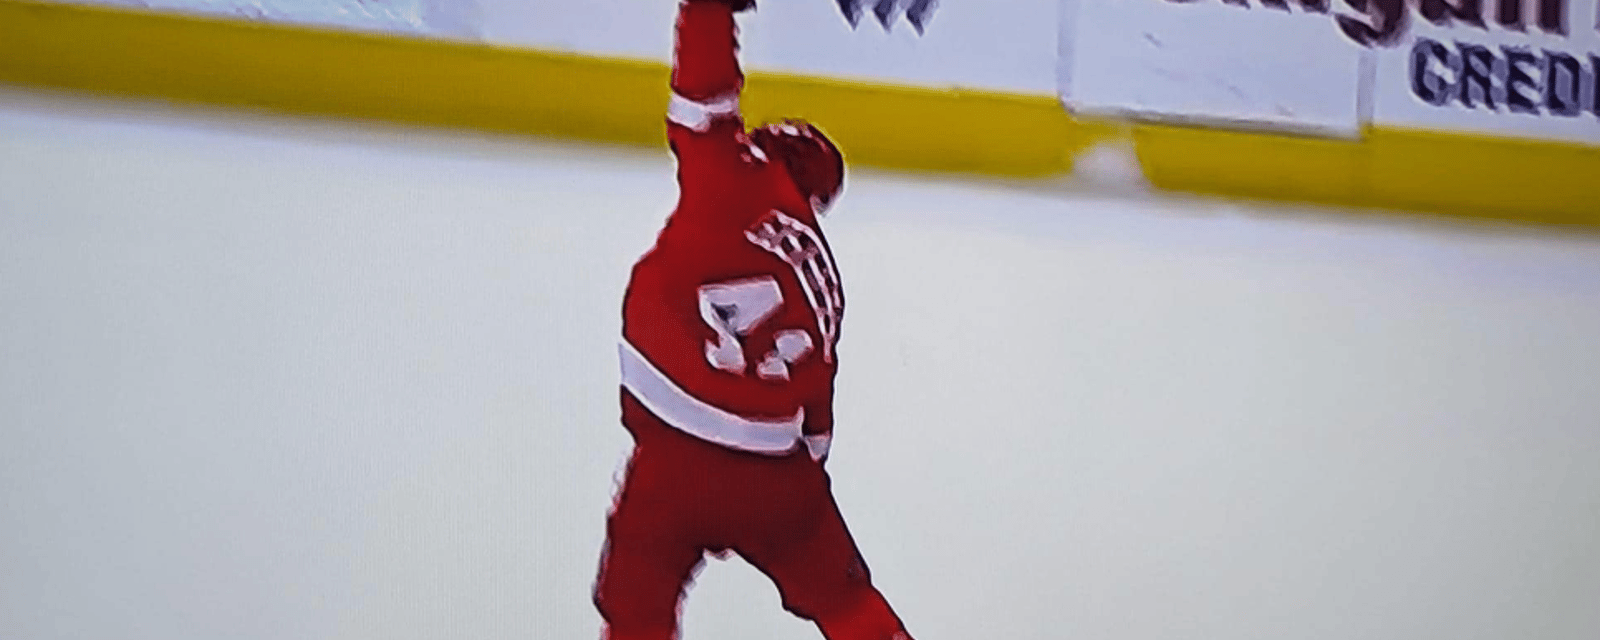 Shayne Gostisbehere saves Red Wings season with epic leap 